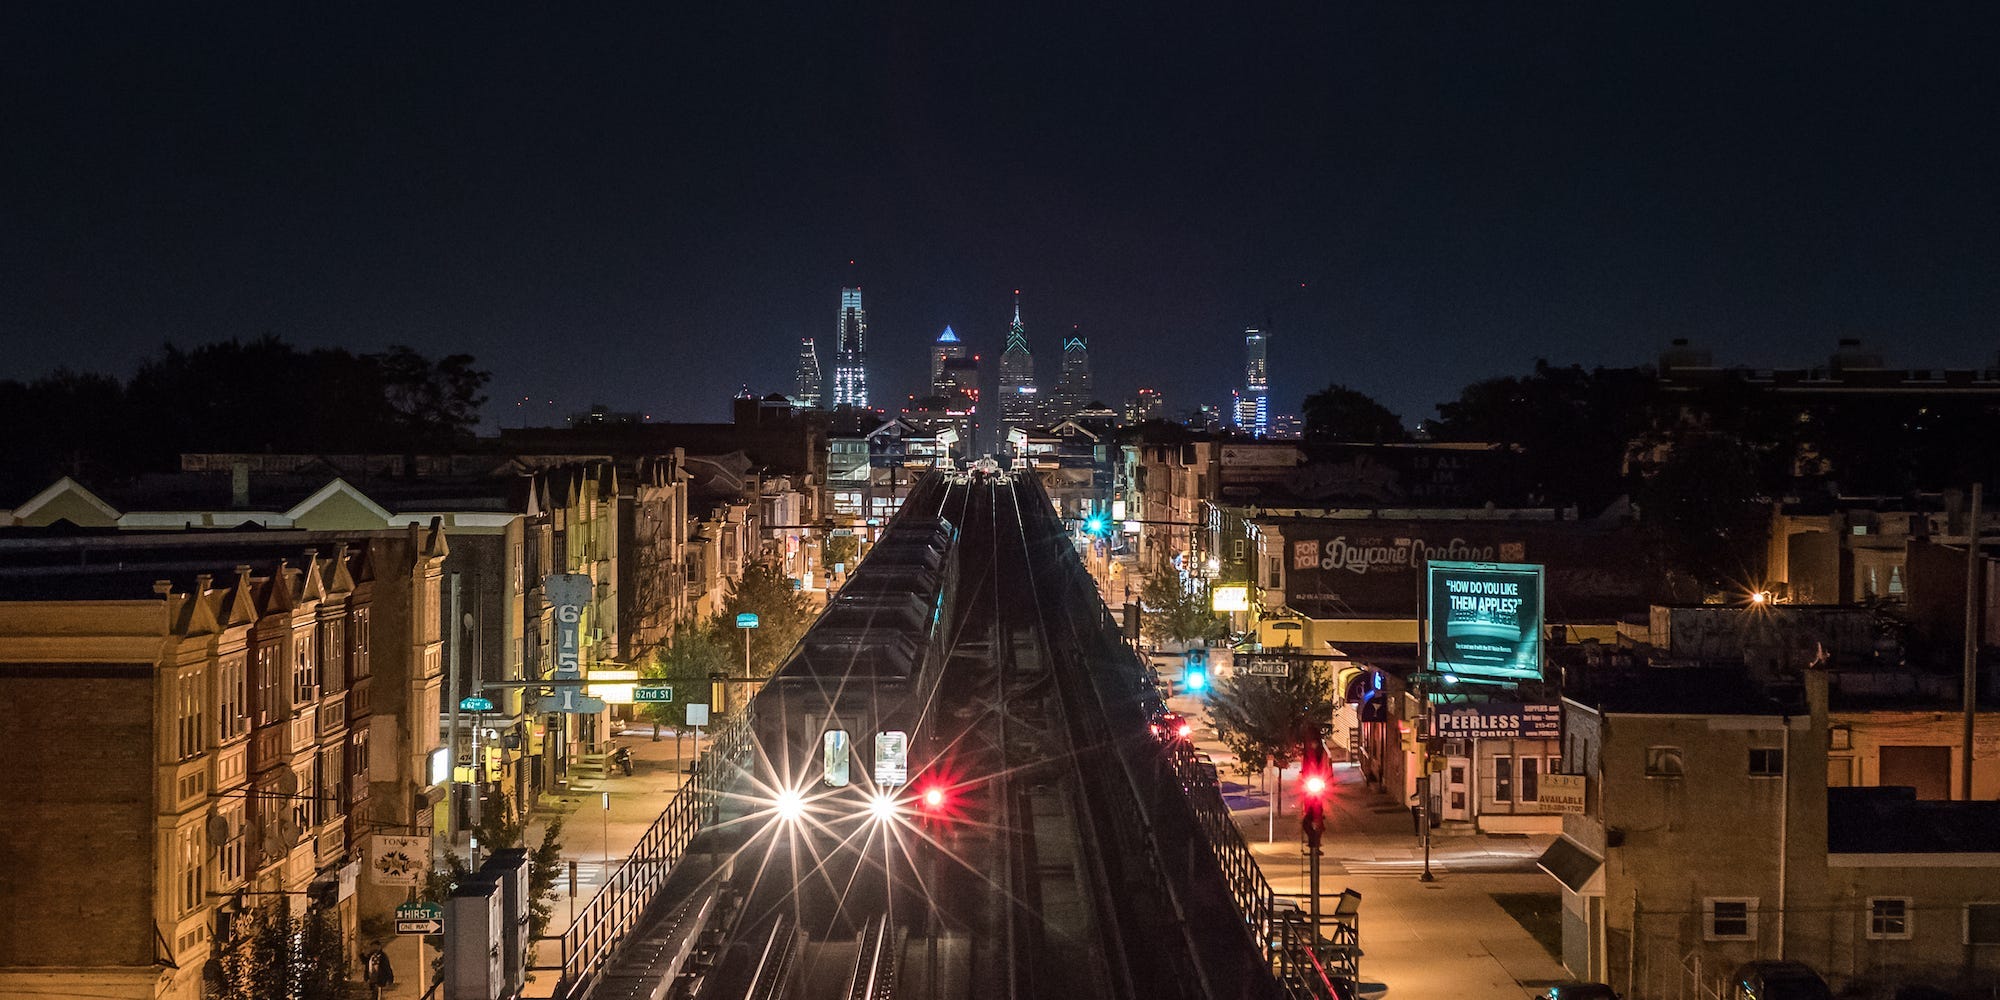 This elevated view shows the Market-Frankford train in Philadelphia's public transit system called SEPTA.